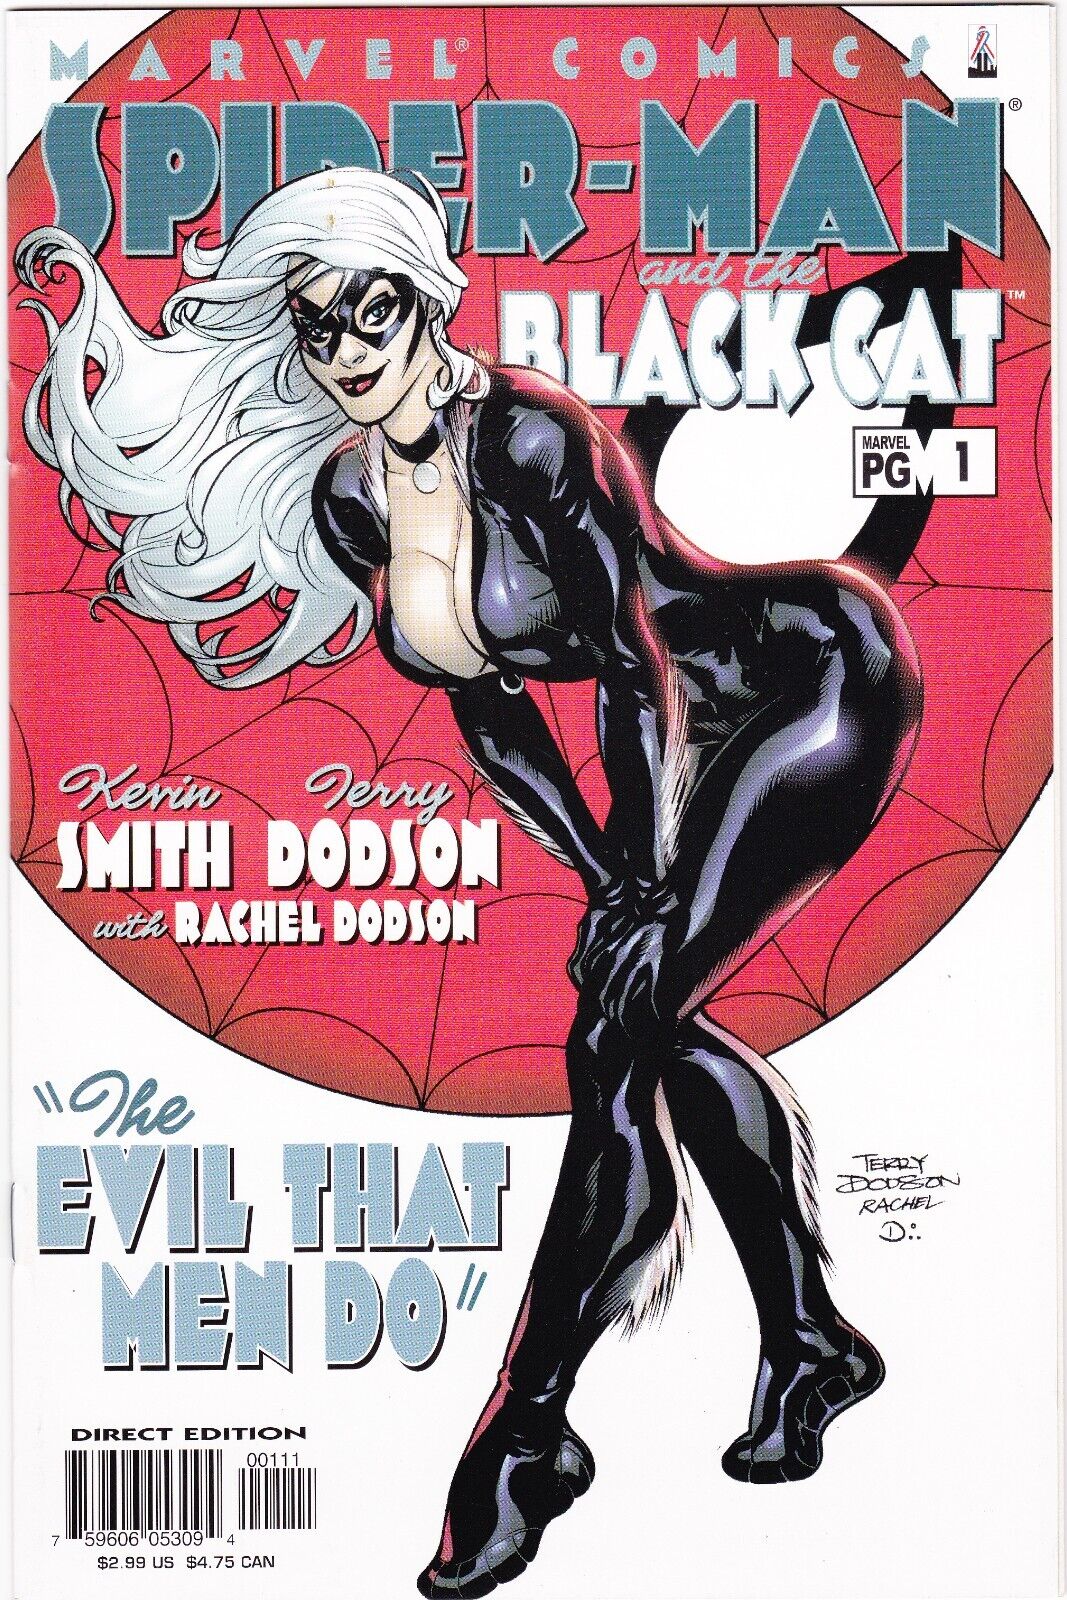 SPIDER-MAN AND THE BLACK CAT #1 & 2  / KEVIN SMITH / DODSONS /MARVEL COMICS 2002